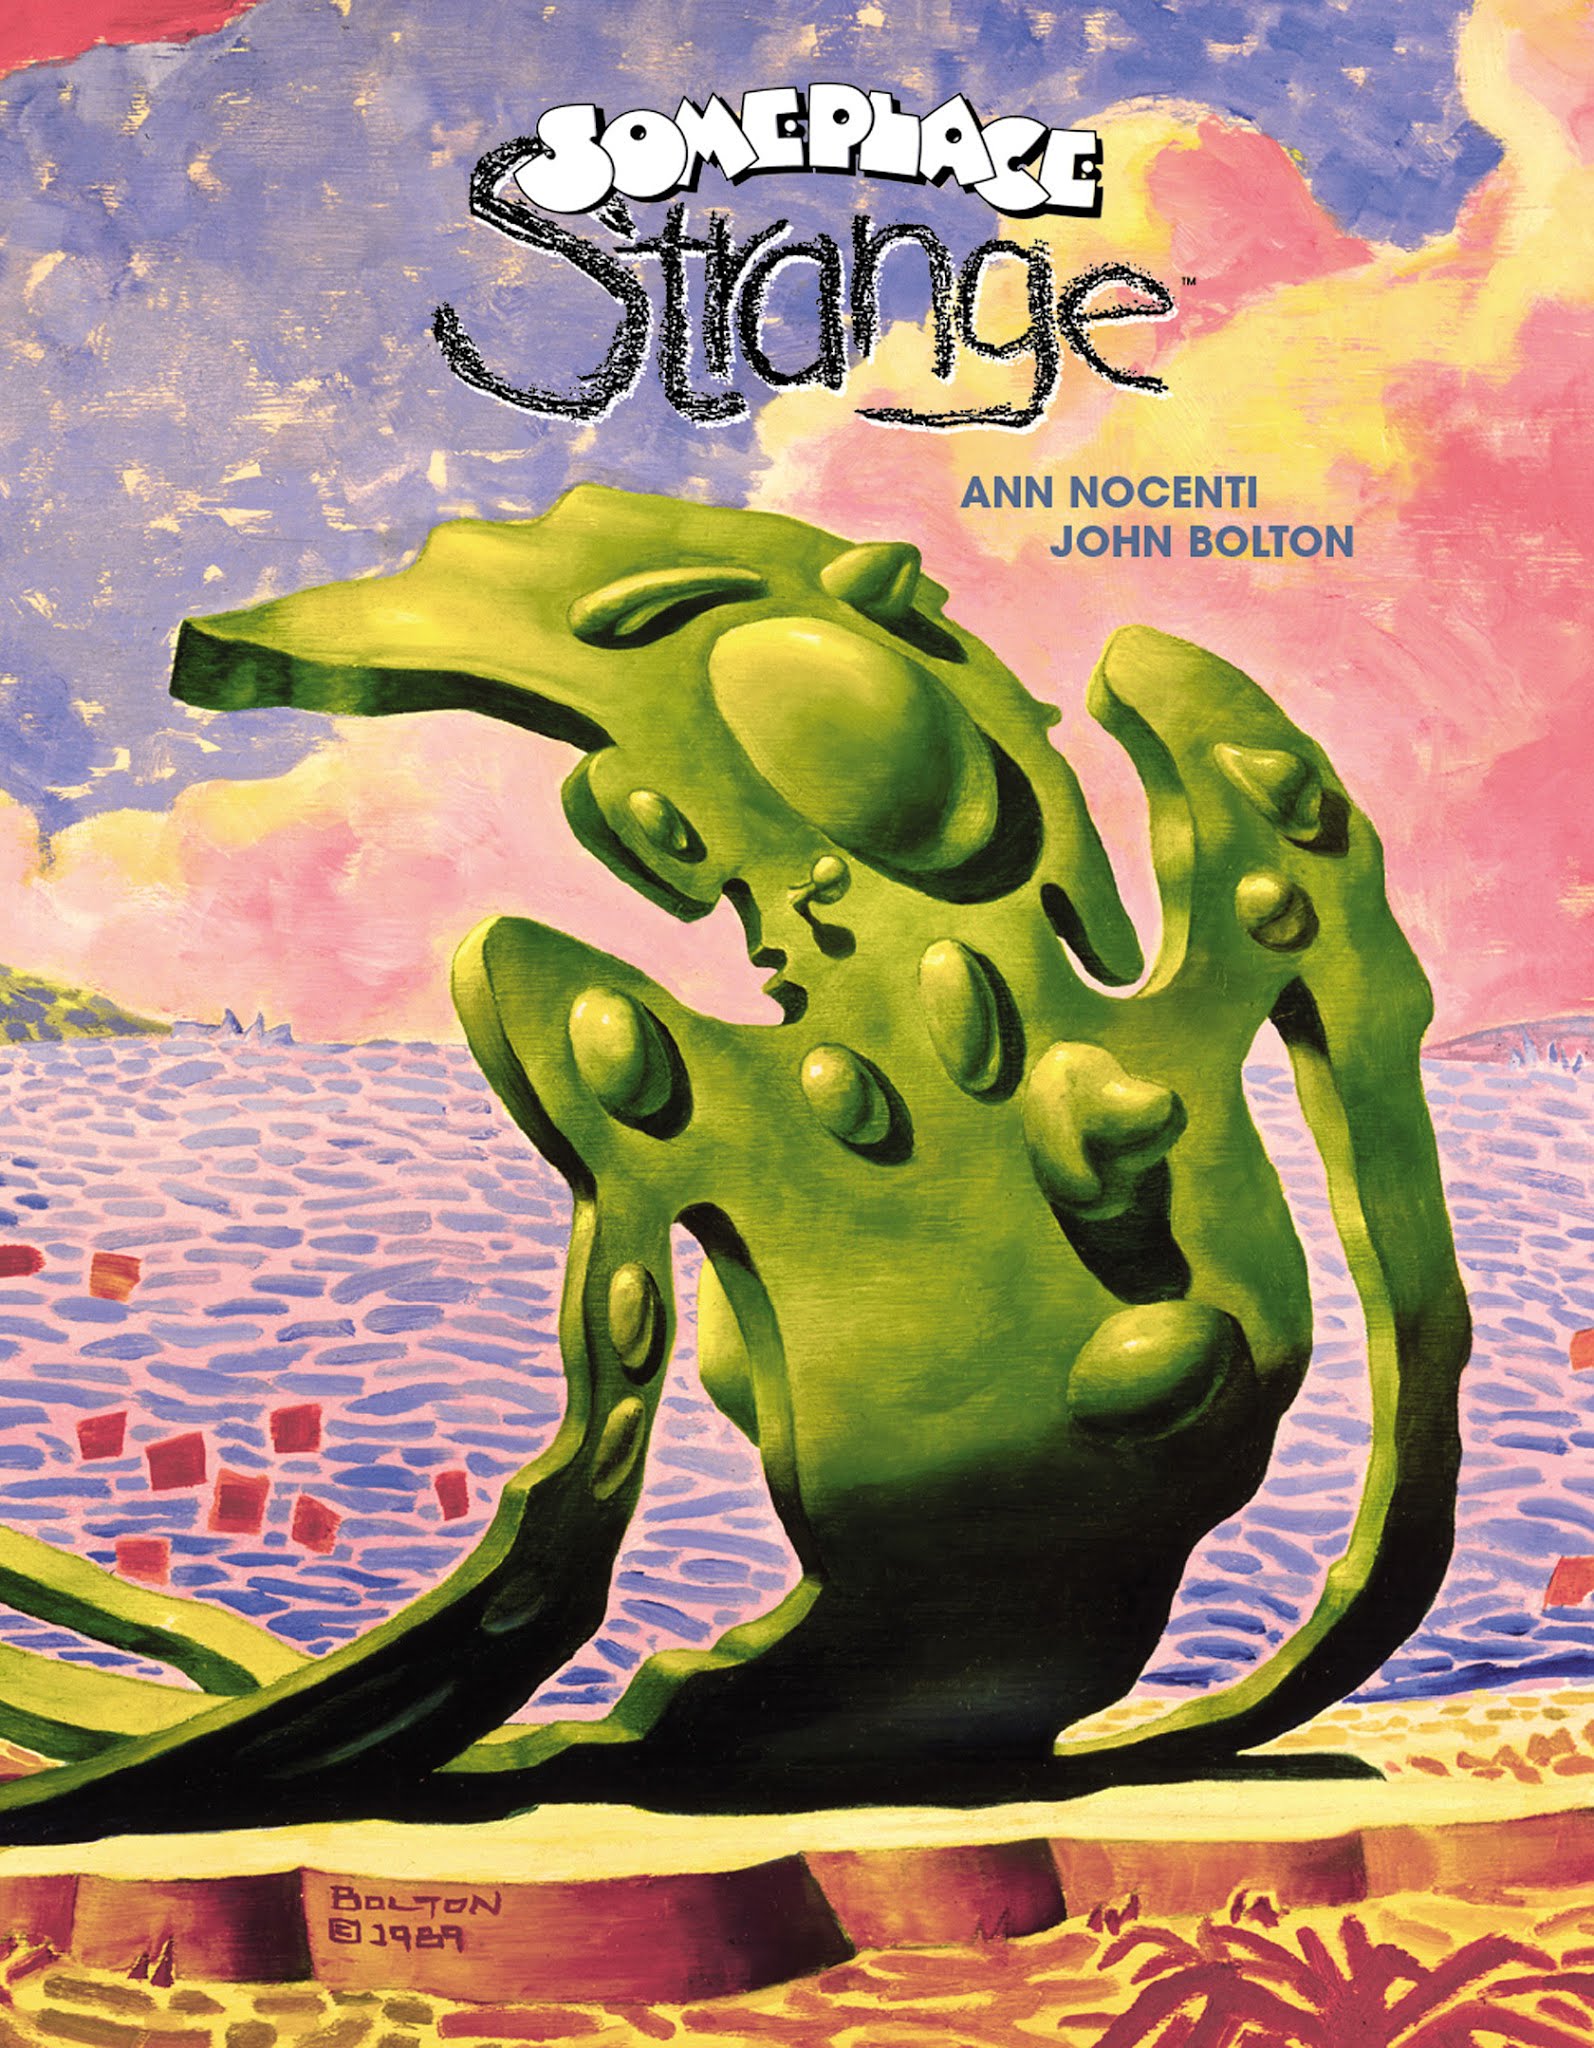 Read online Someplace Strange comic -  Issue # TPB - 1